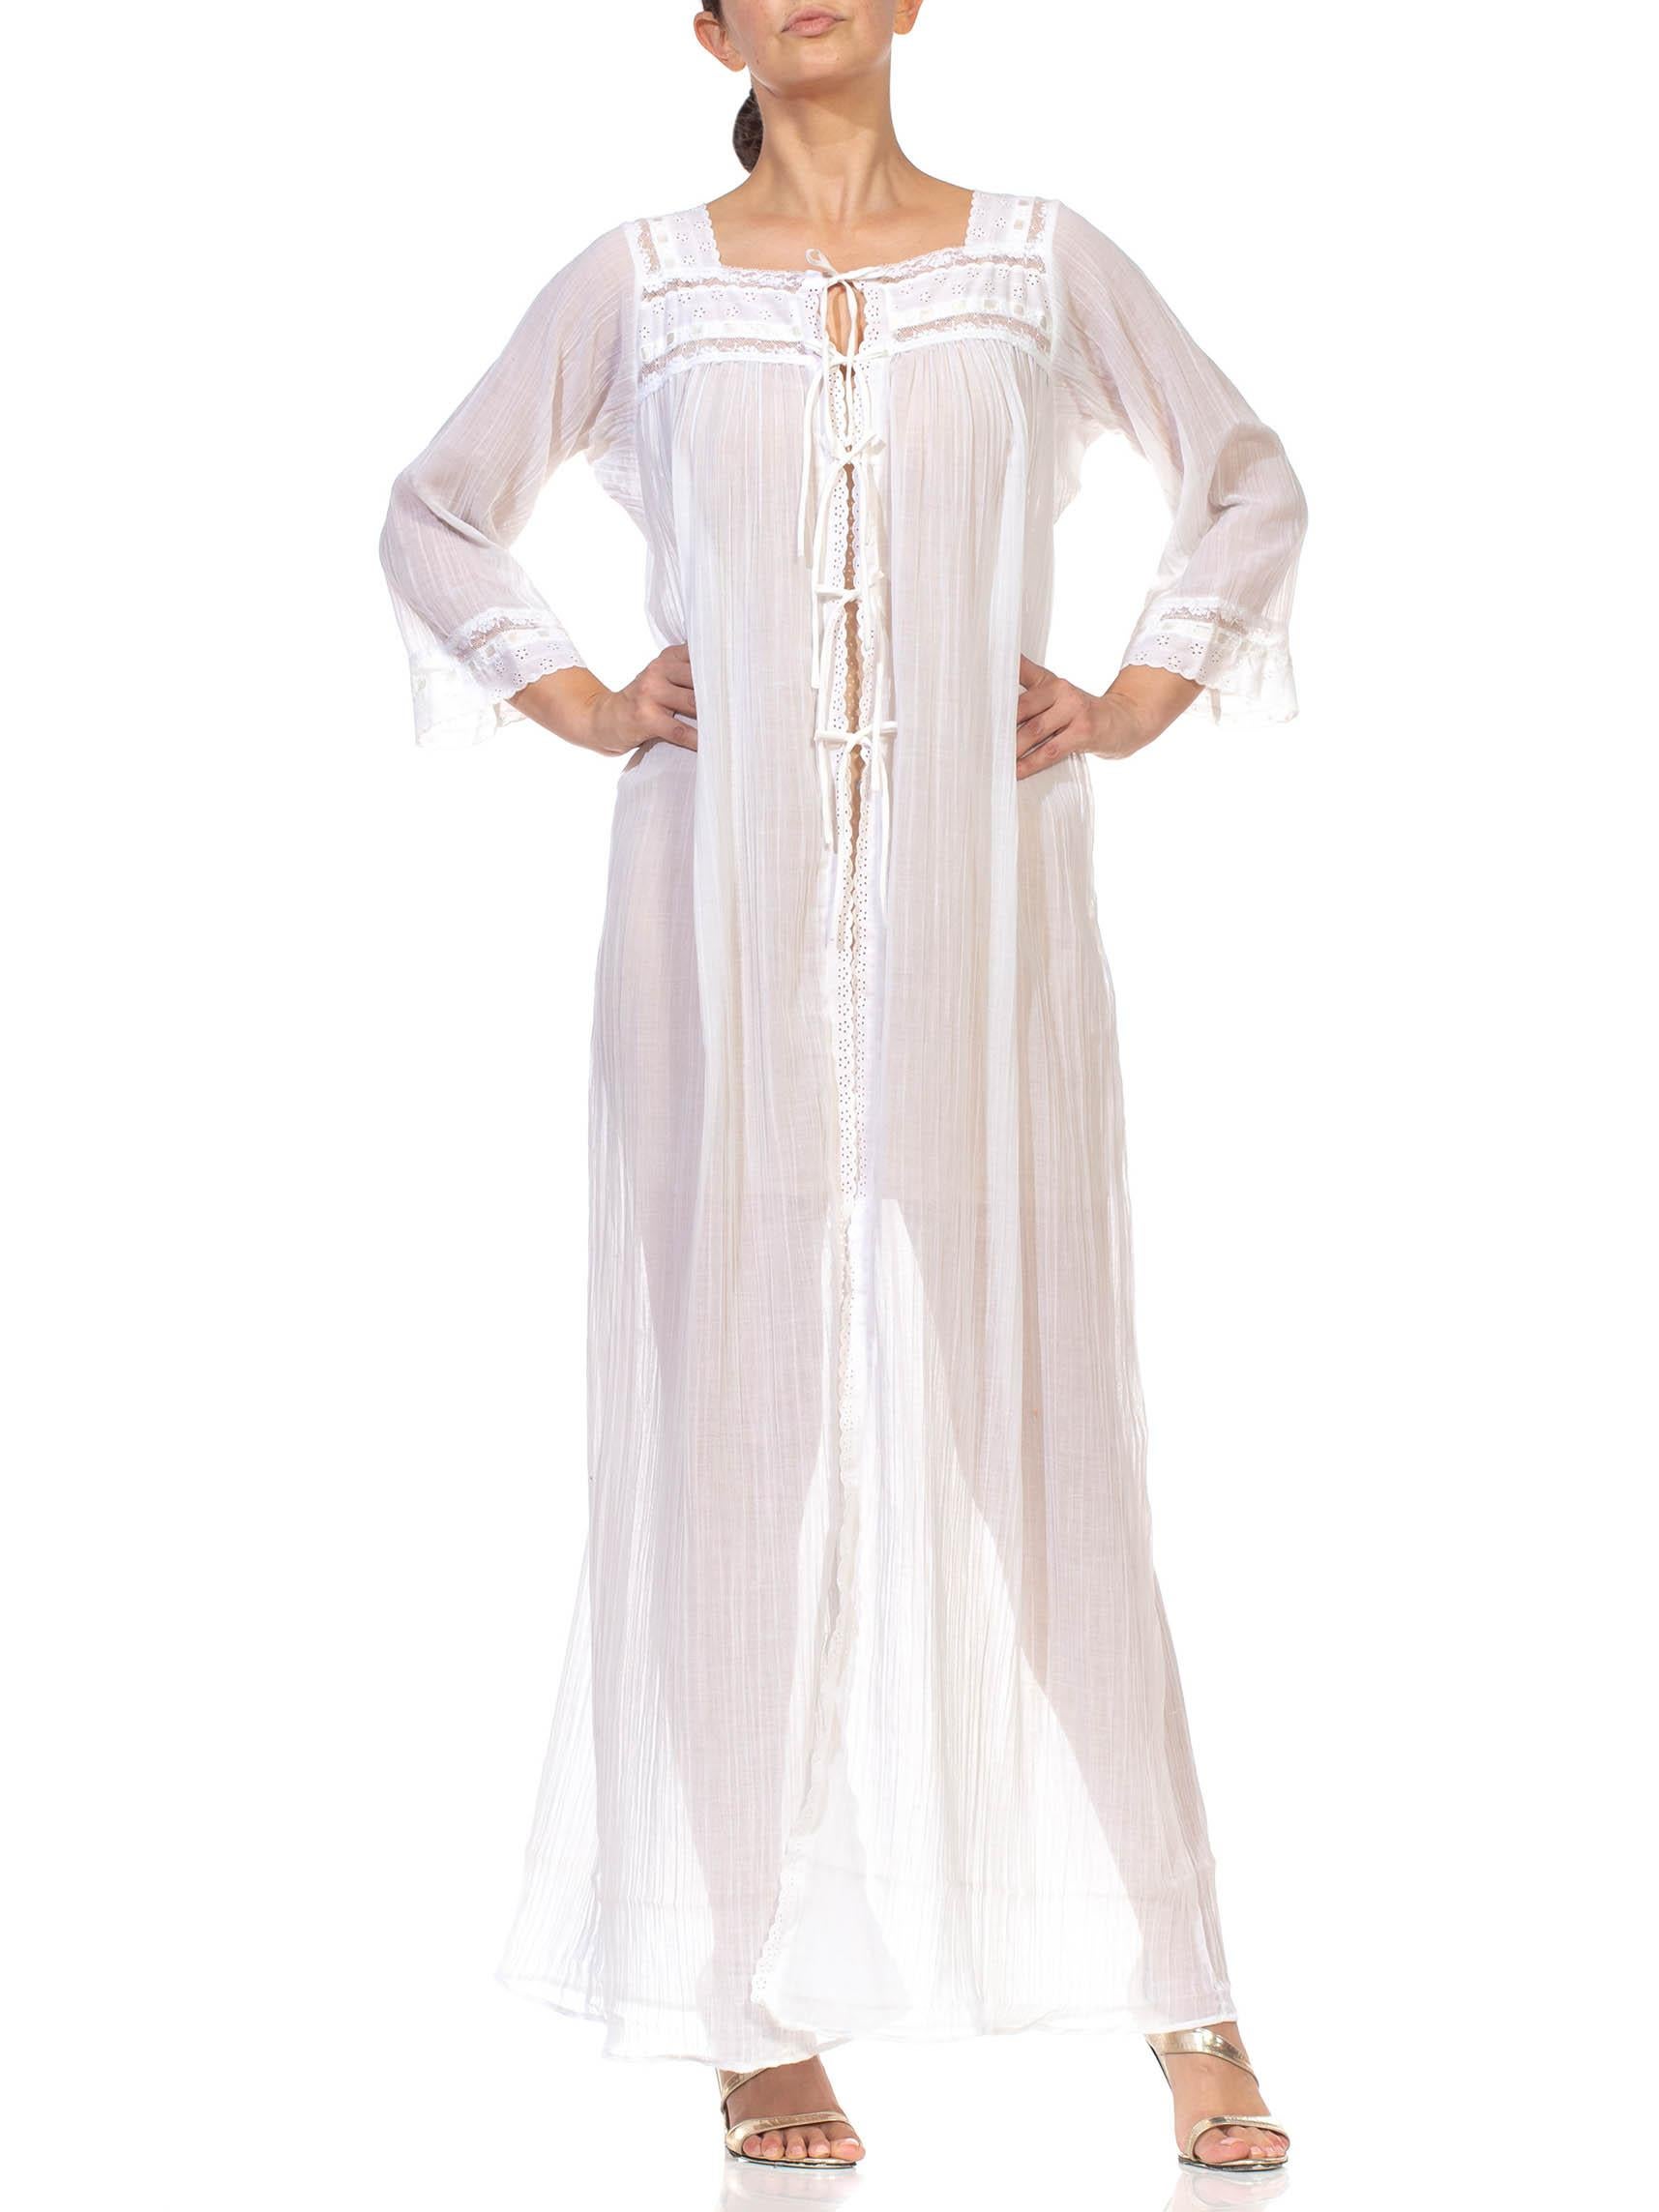 Women's 1980S CHRISTIAN DIOR White Cotton Lace Trimed Robe With Front Tie Closure